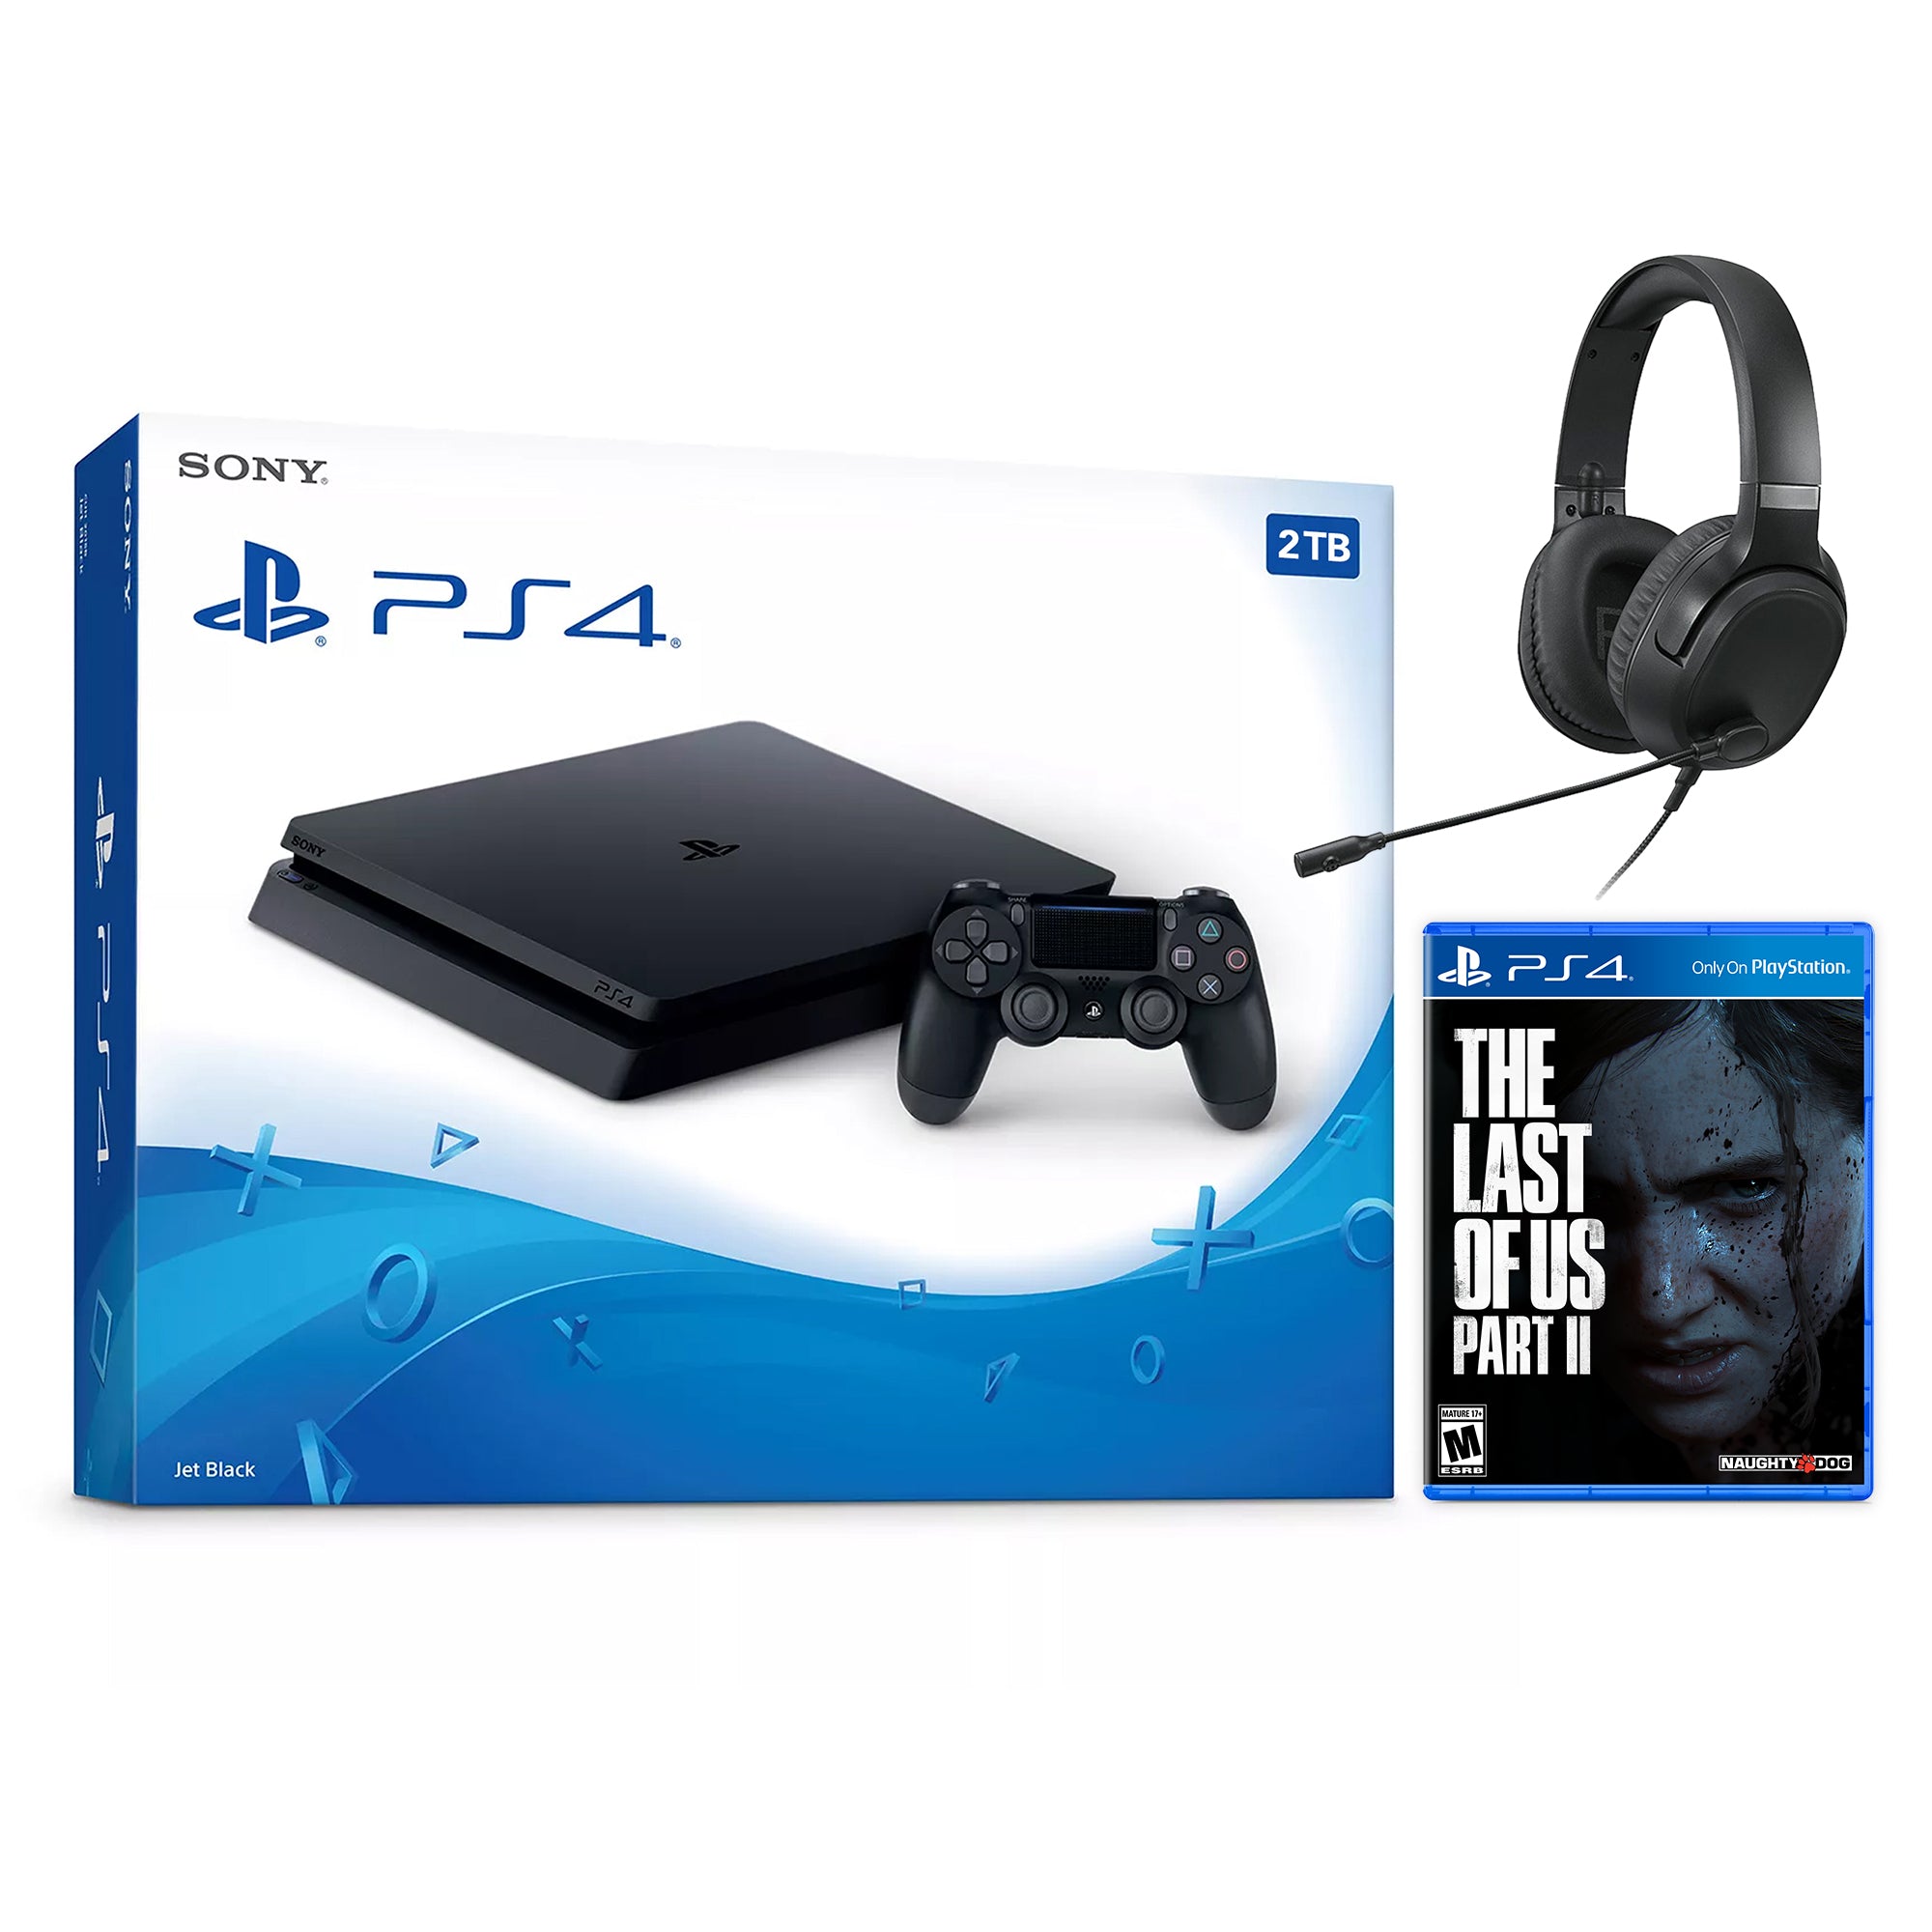 Sony PlayStation 4 Slim Ratchet & Clank Bundle Upgrade 2TB HDD PS4 Gaming Console, Jet Black, with Mytrix Chat Headset - Large Capacity Internal Hard Drive Enhanced PS4 Console